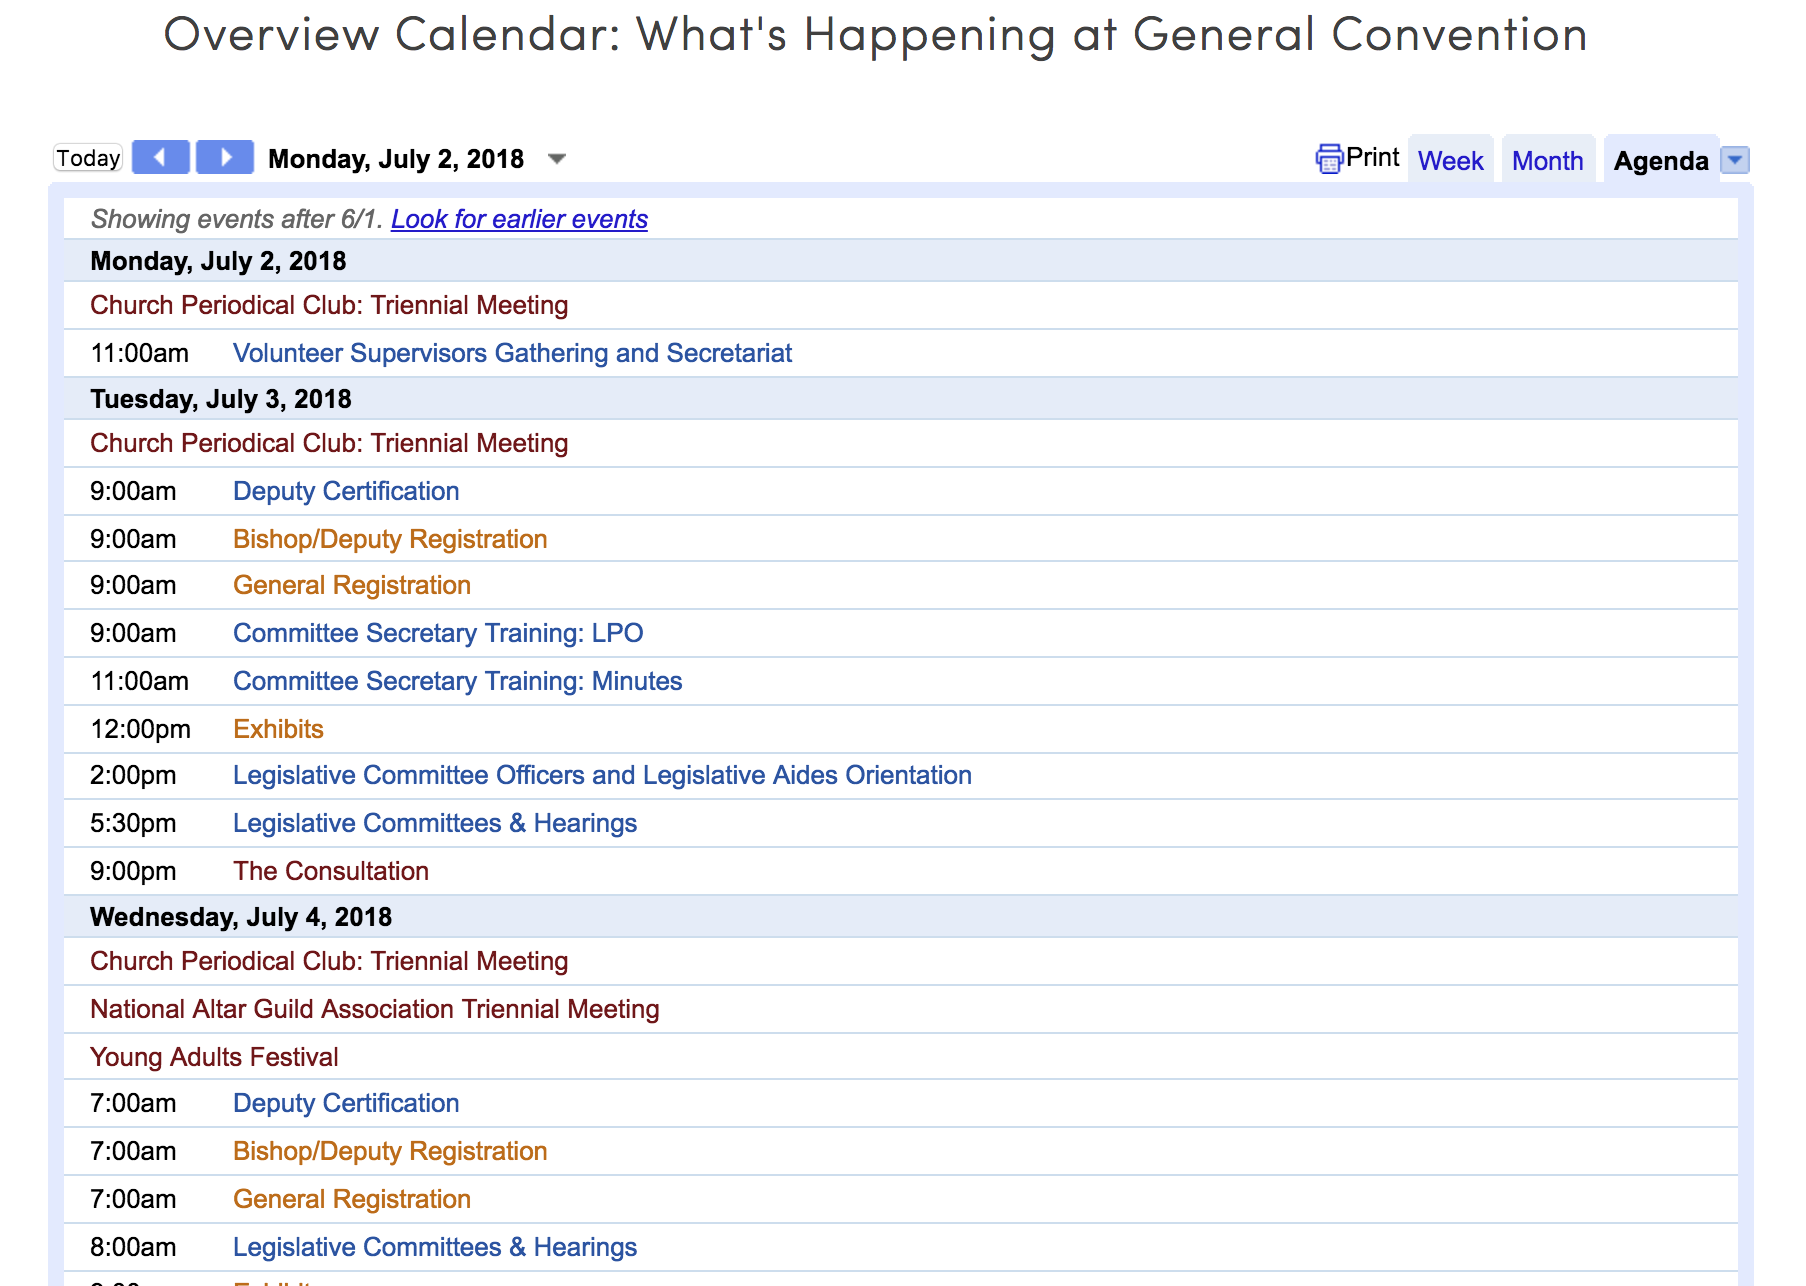 General Convention Overview Calendar Online in 2018